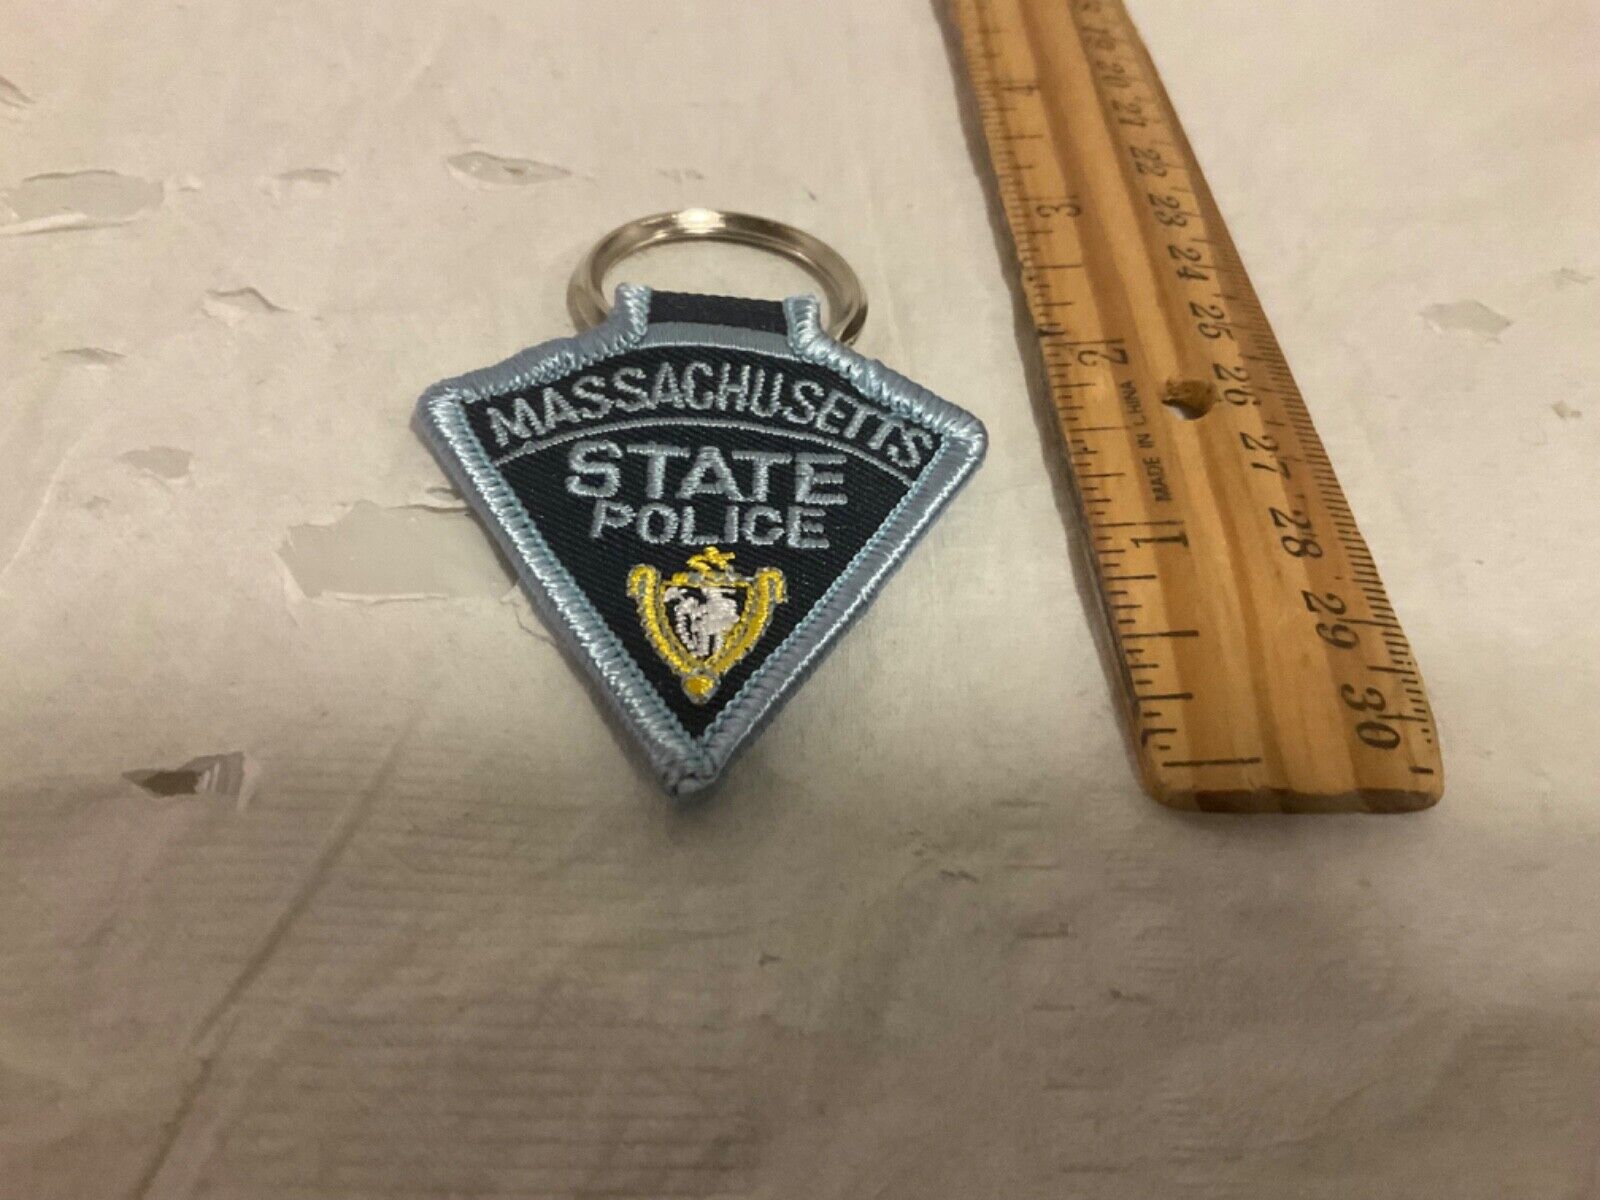 Massachusetts State Police Patch key chain.